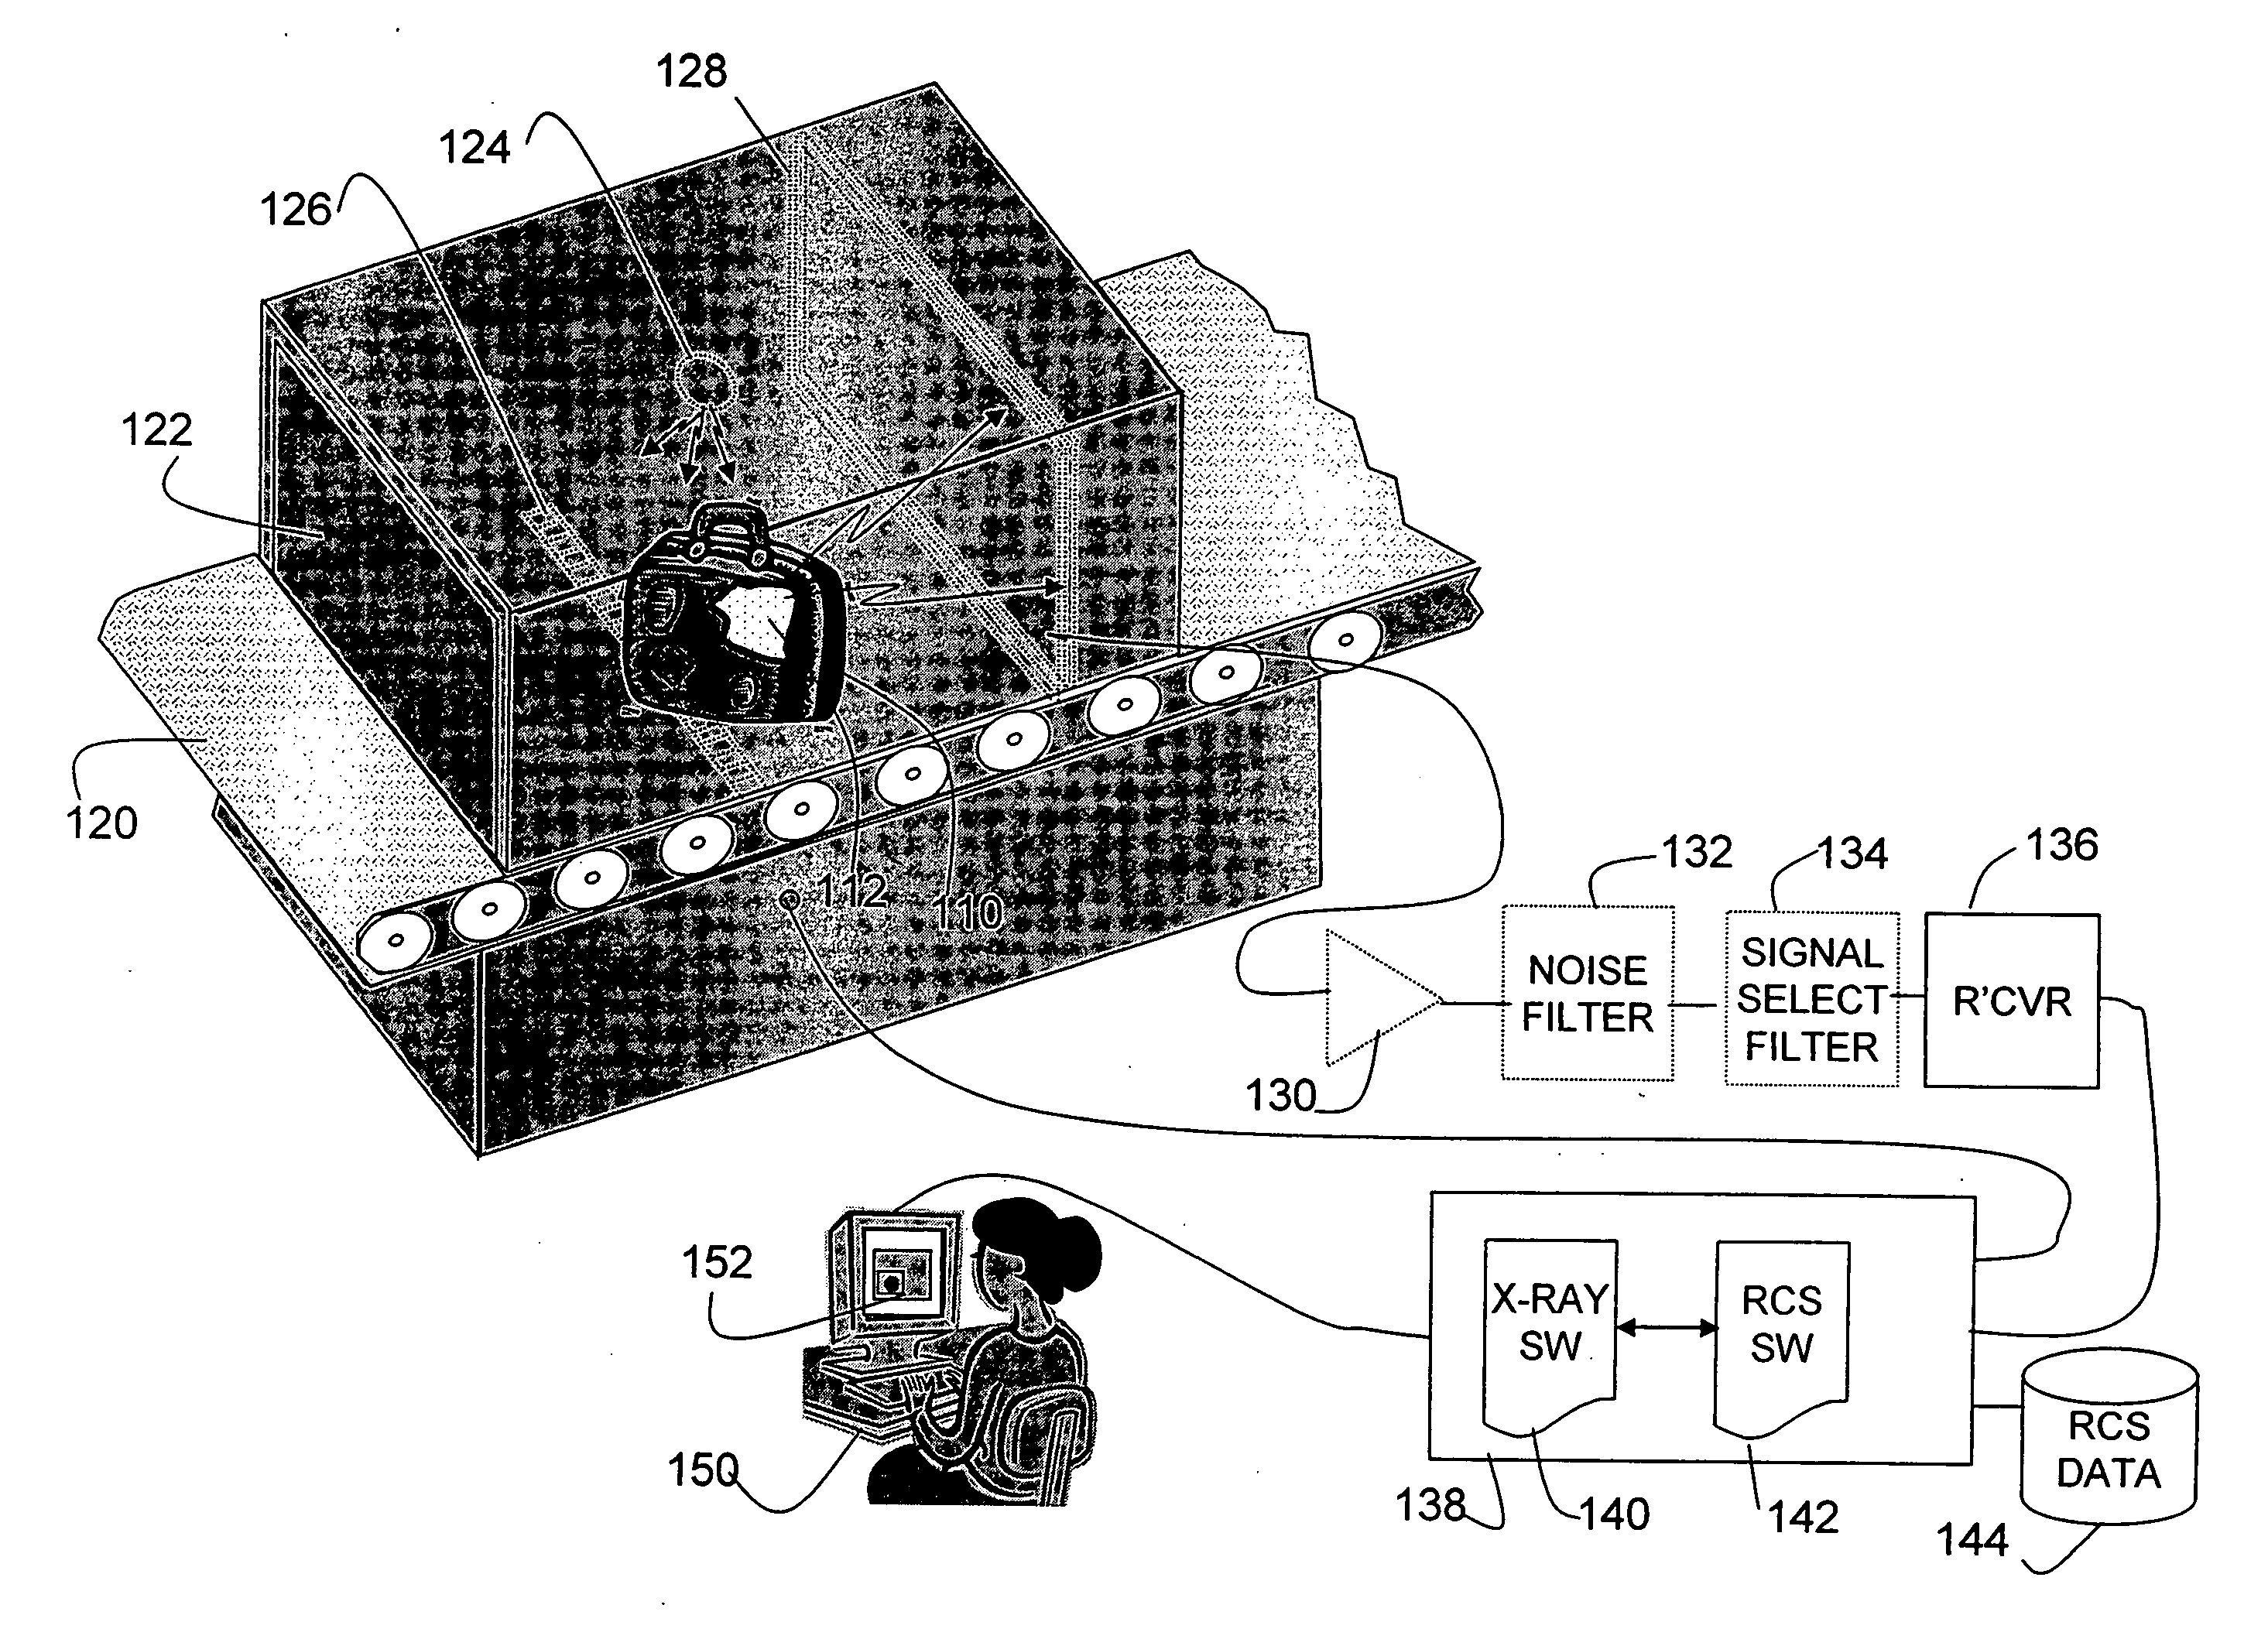 Method and apparatus for detecting contraband using radiated compound signatures